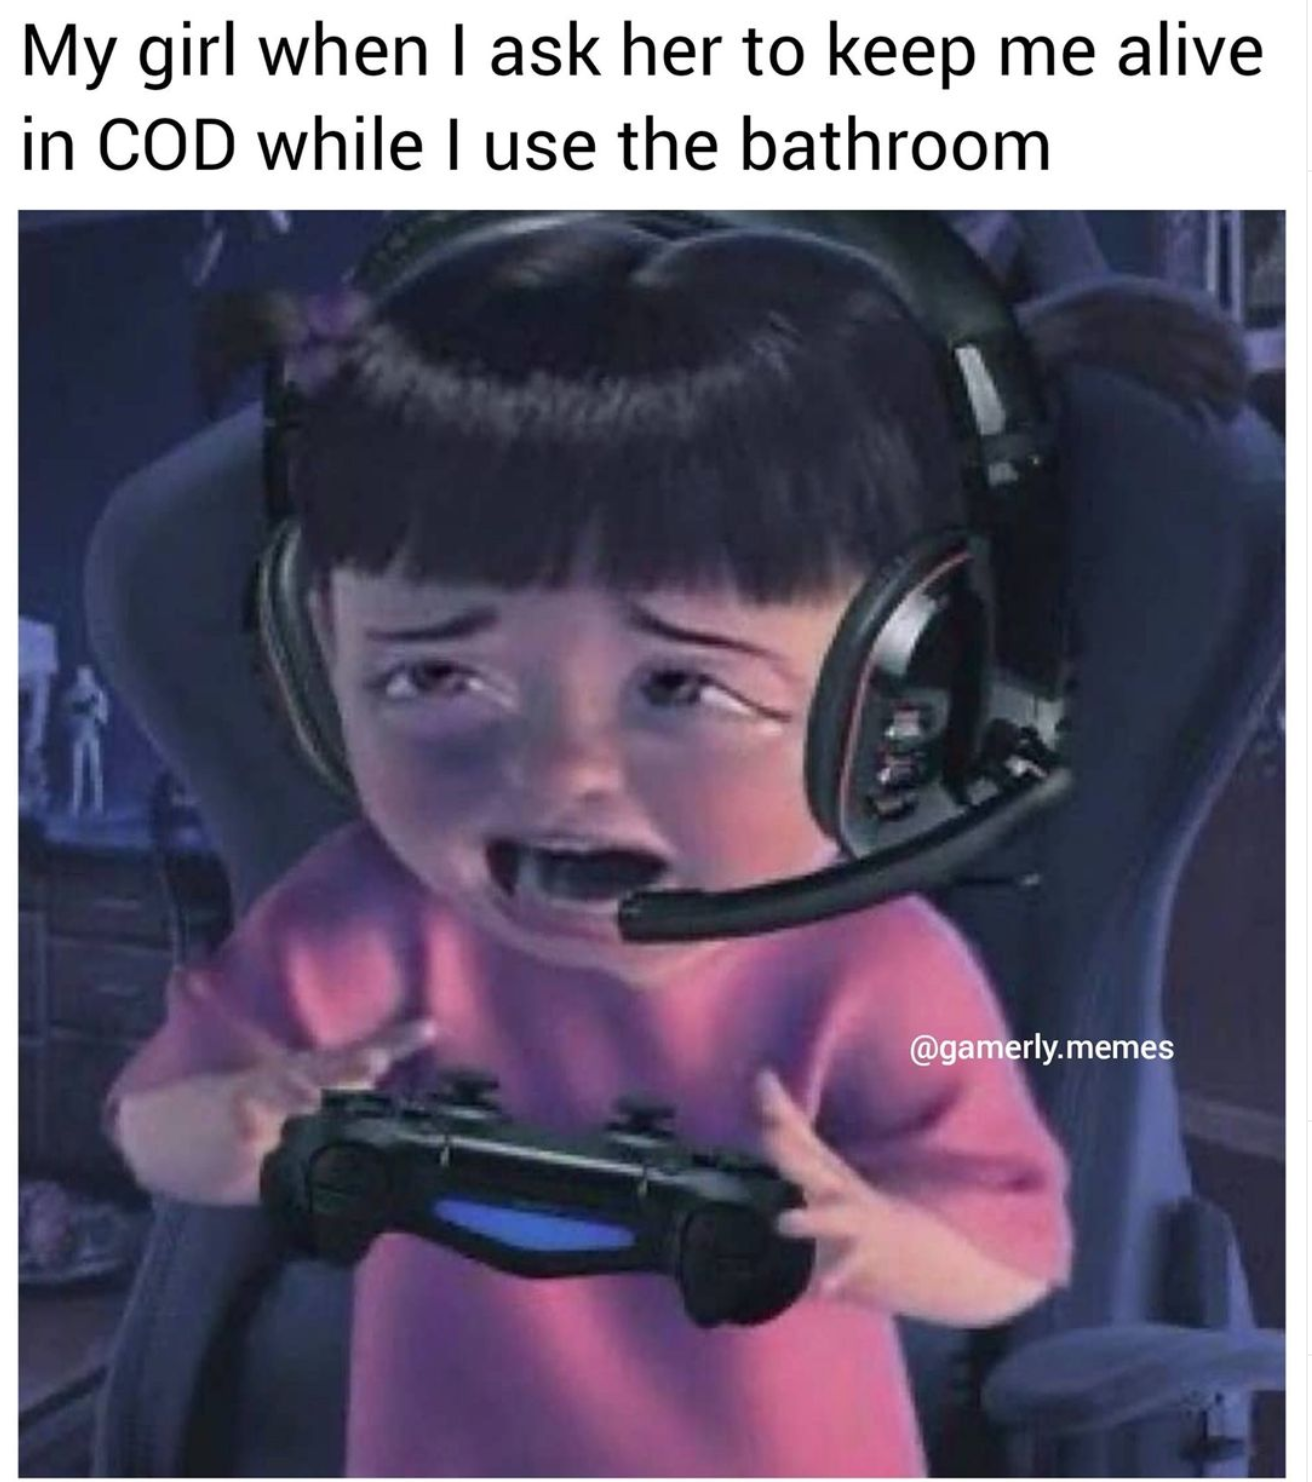 funny gaming memes - Video game - My girl when I ask her to keep me alive in Cod while I use the bathroom .memes